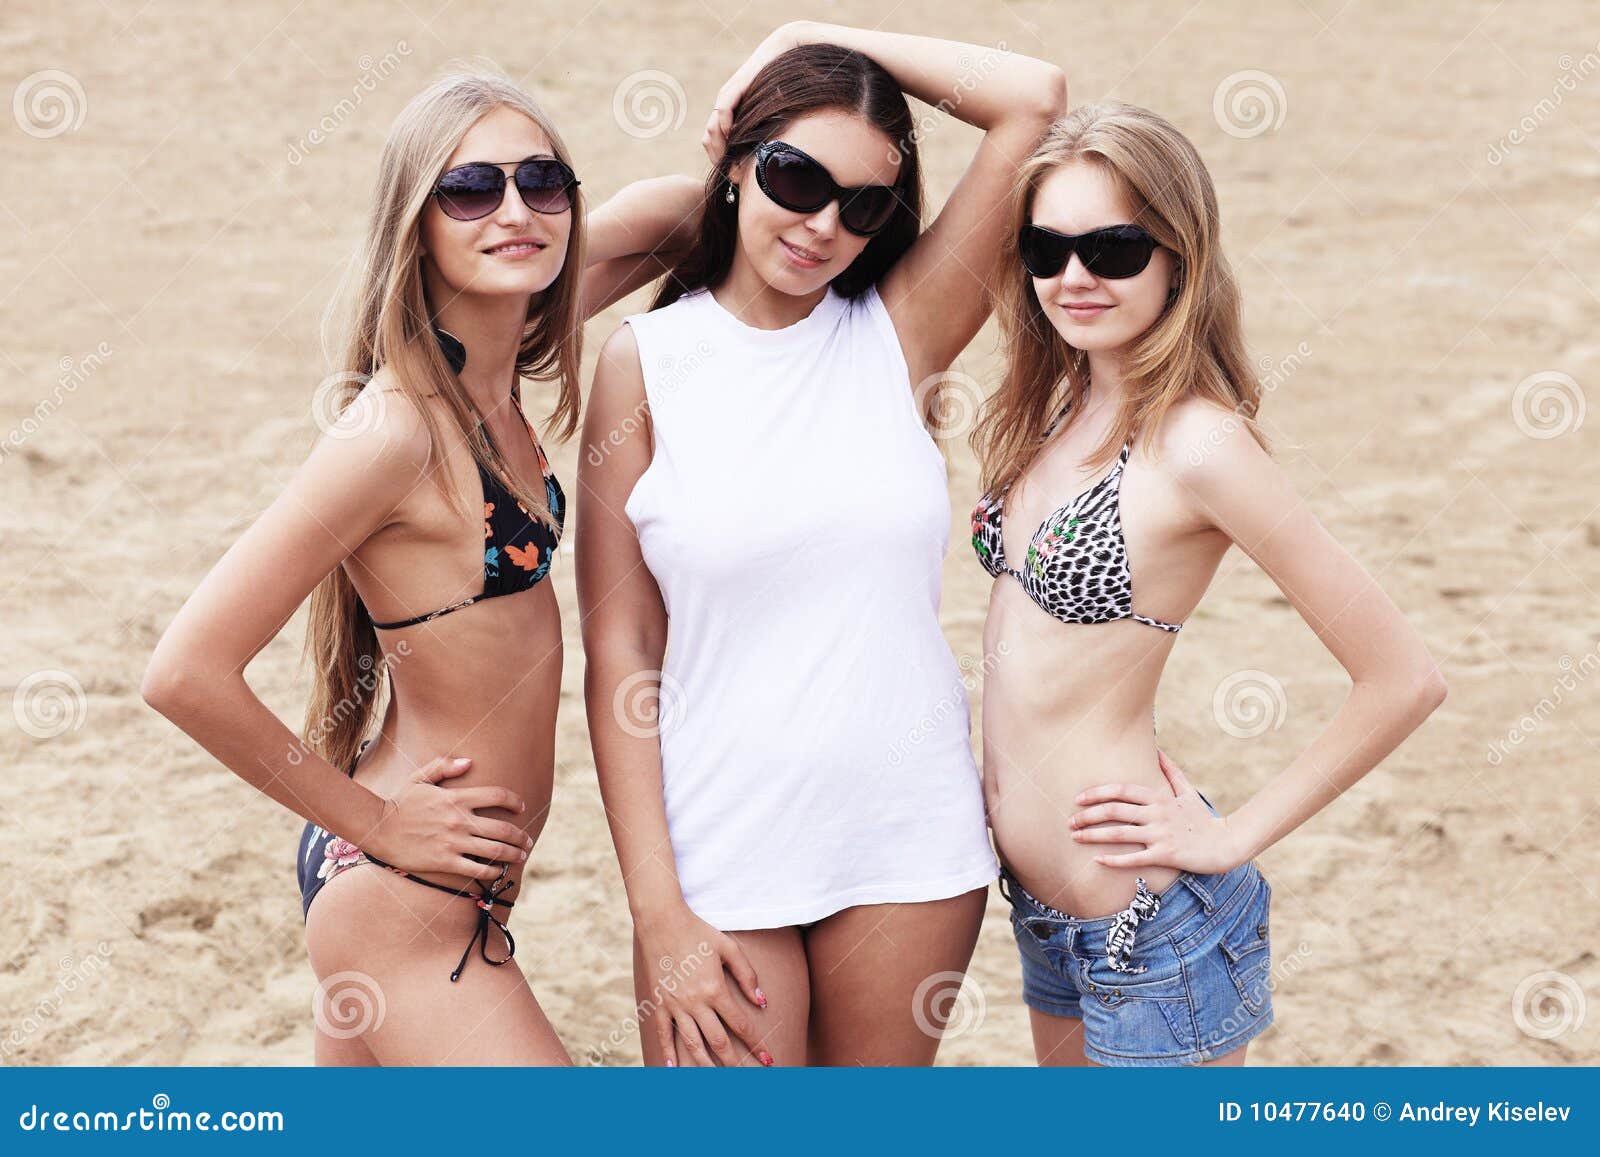 amy tickle recommends ladies on the beach pictures pic